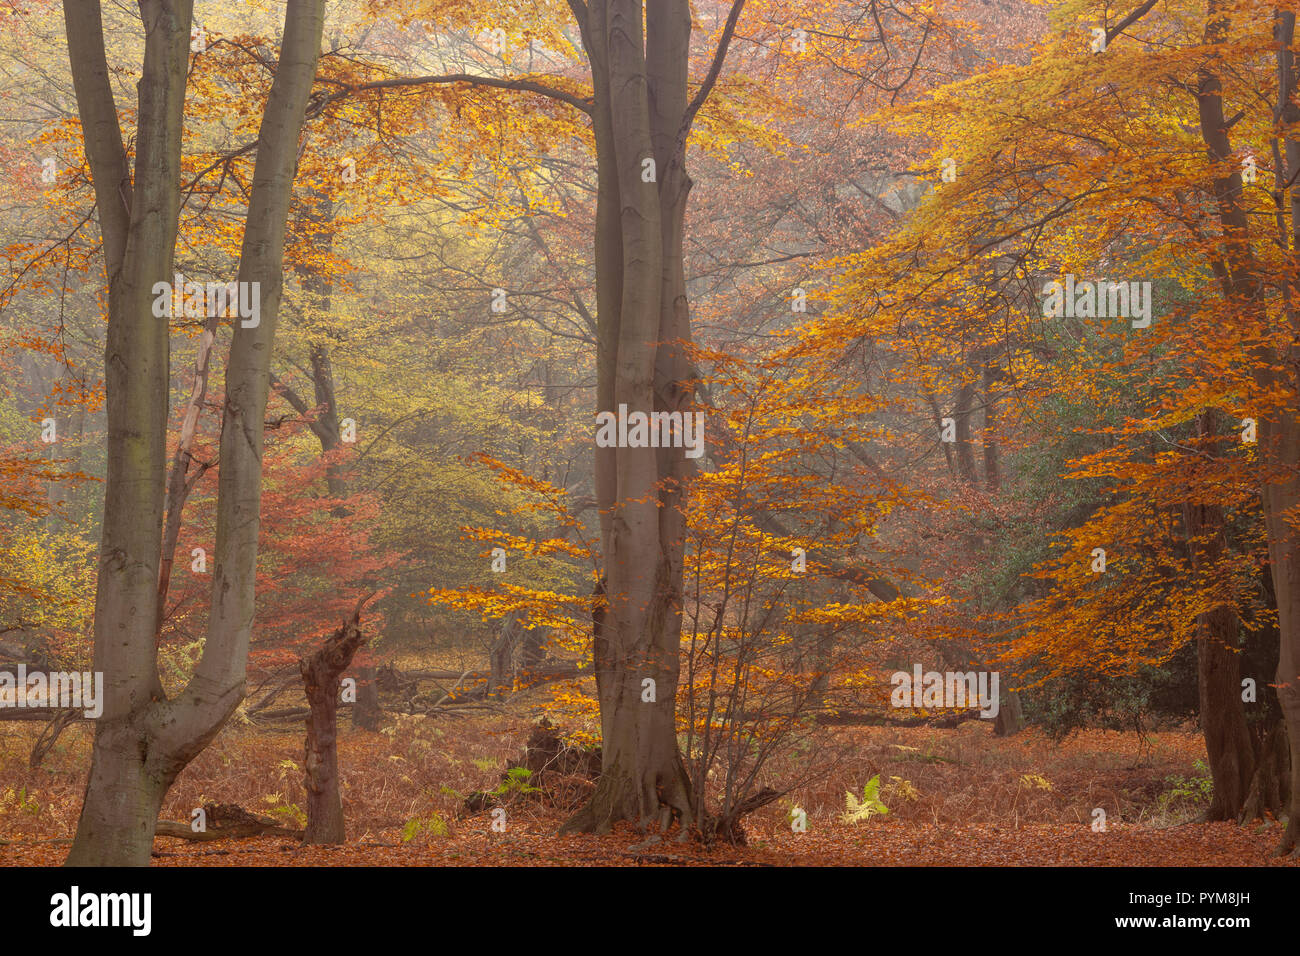 Autumn colours of the woodland in Epping forest, Essex, England. Autumn forest hues of gold yellow bronze brown orange in the trees making the scene. Stock Photo